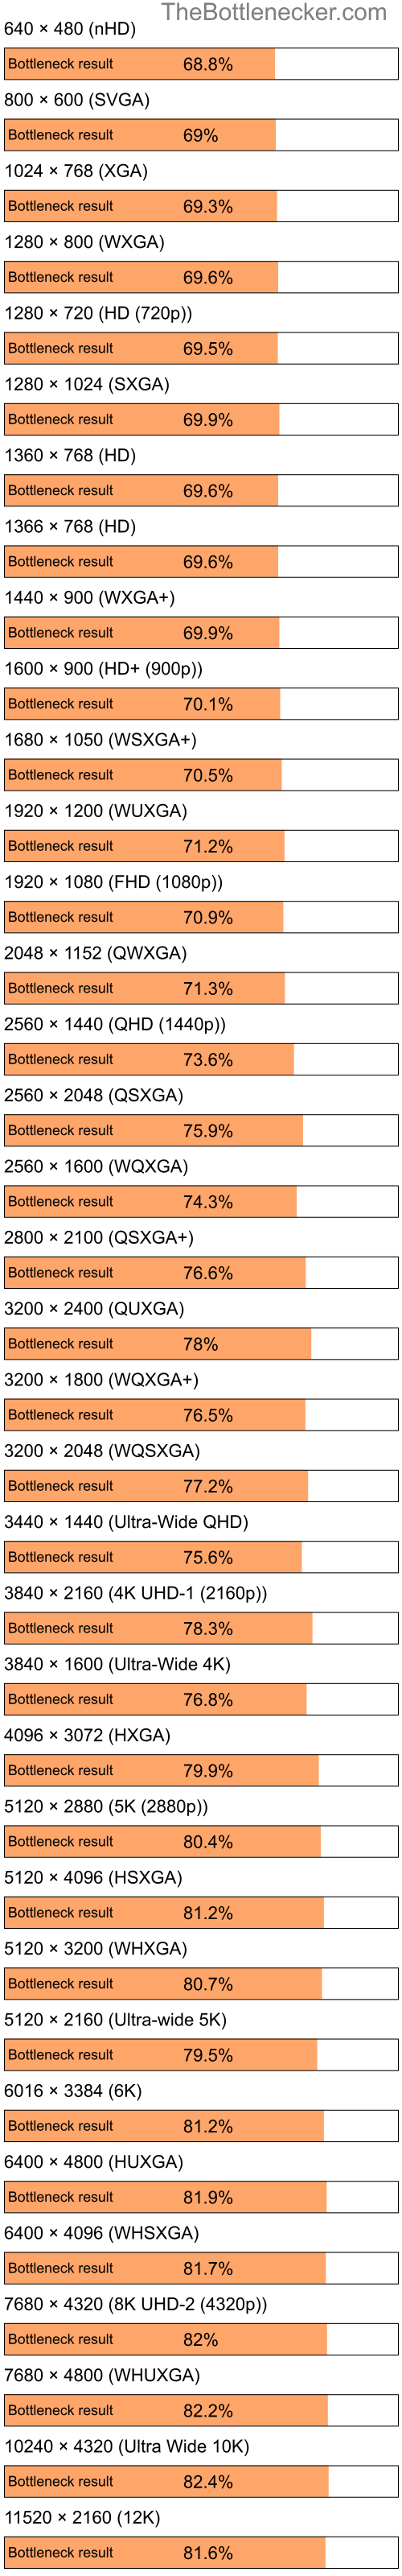 Bottleneck results by resolution for Intel Celeron and AMD Mobility Radeon 9700 in Processor Intense Tasks